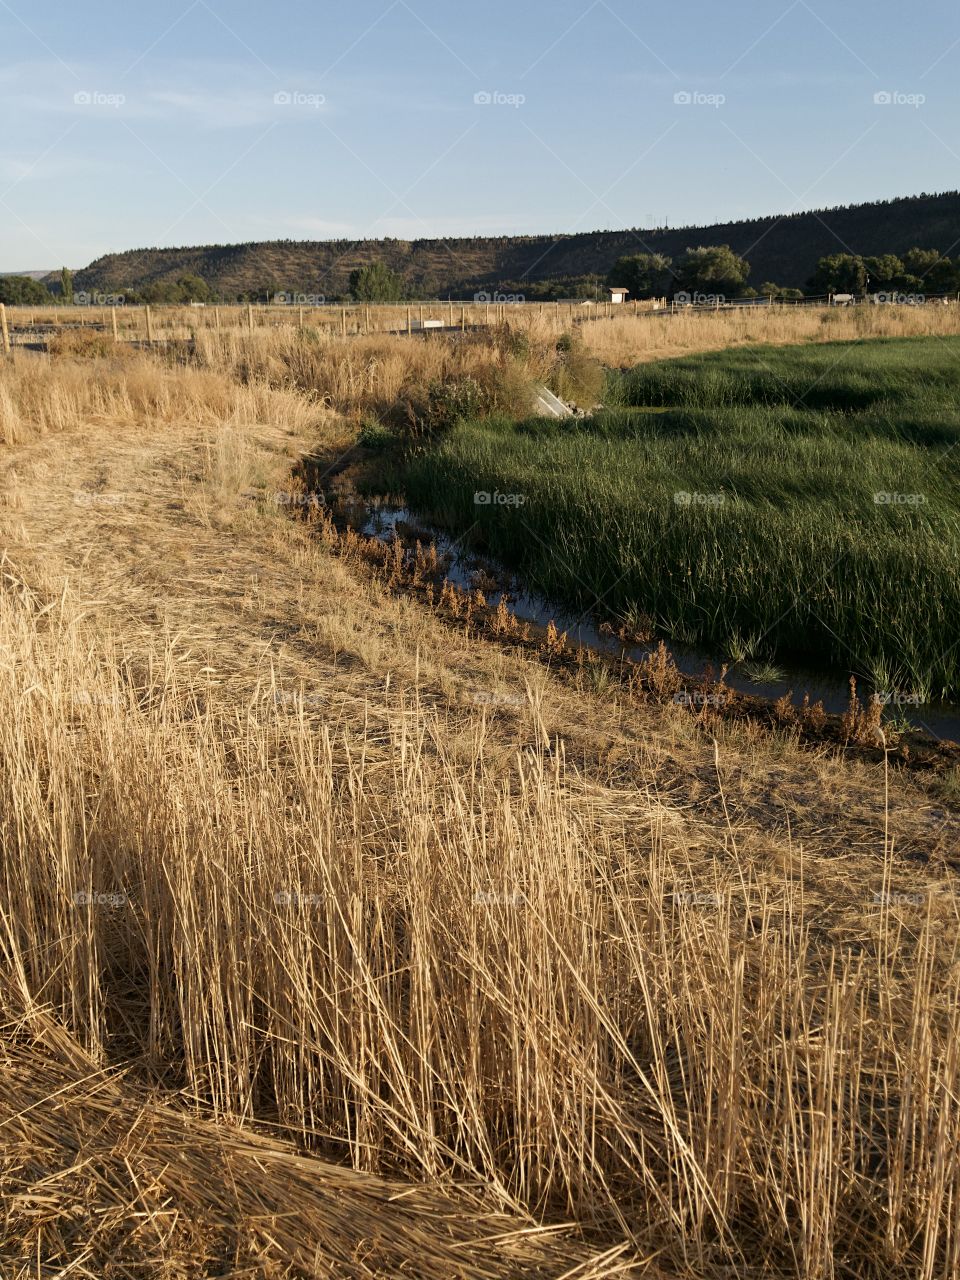 A lush green field amid dried reeds in a wildlife park outside of Prineville in Central Oregon on a beautiful fall evening. 